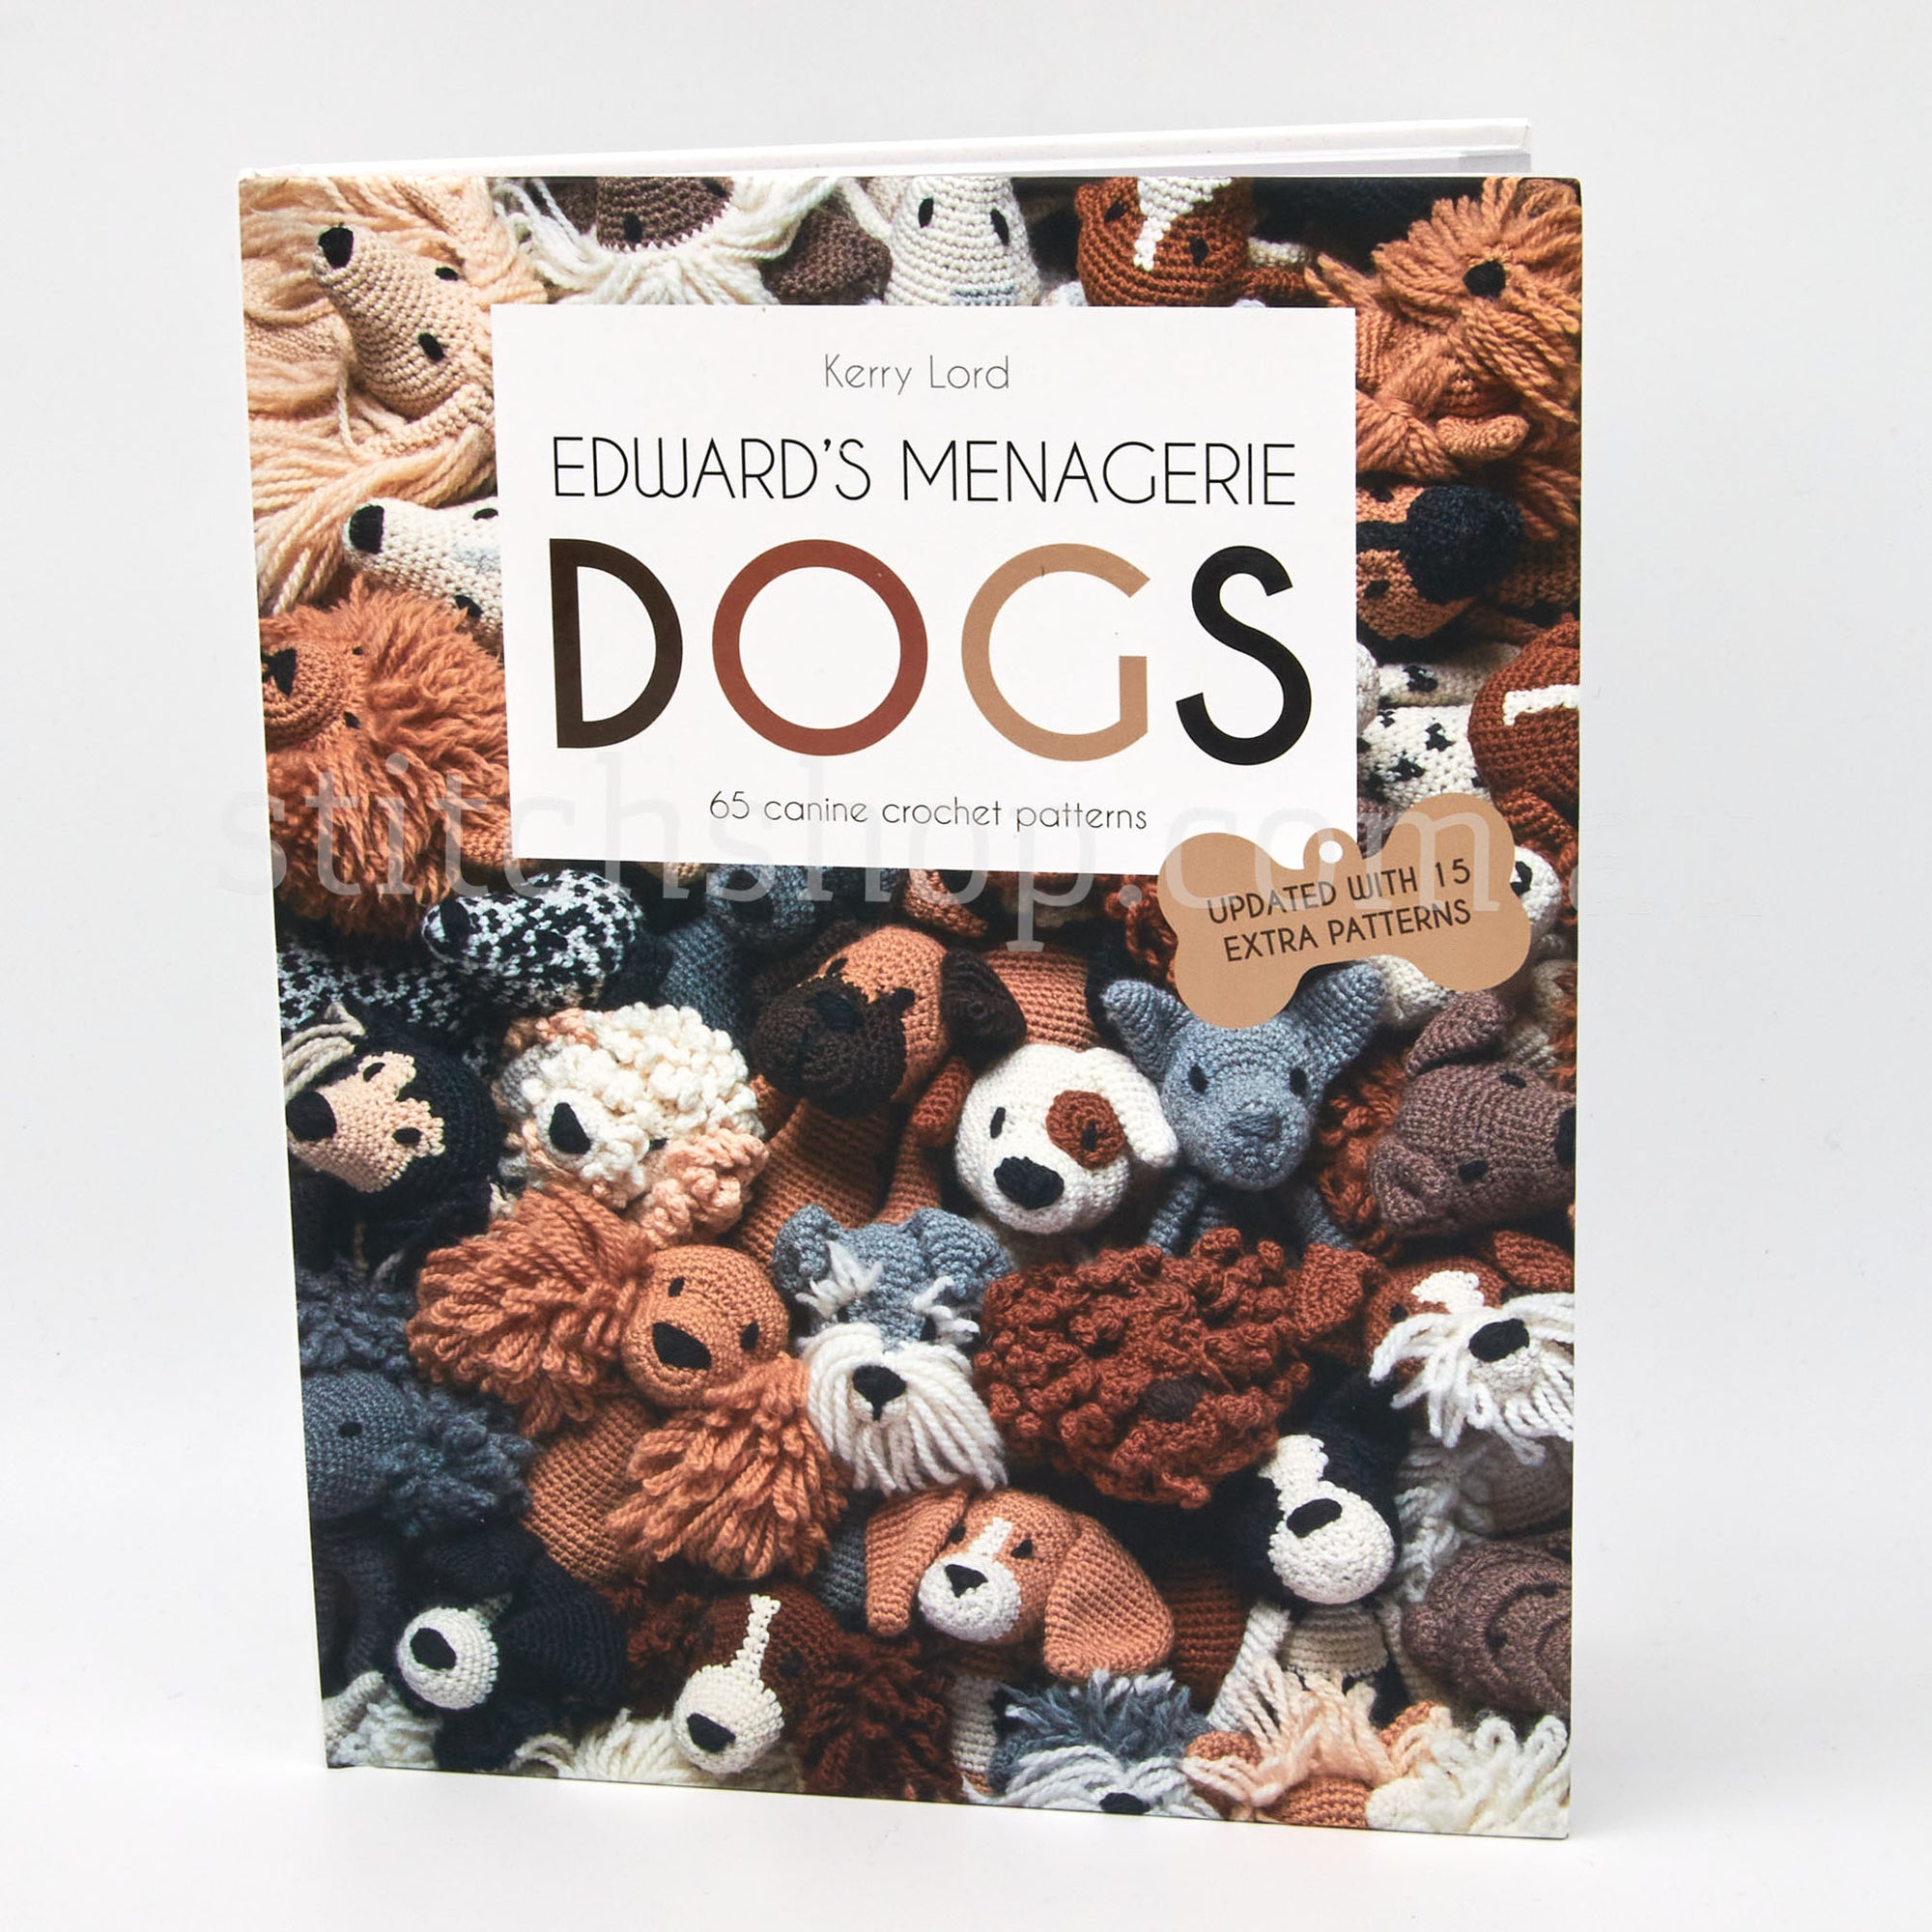 Edward's Menagerie DOGS - updated with 15 extra patterns